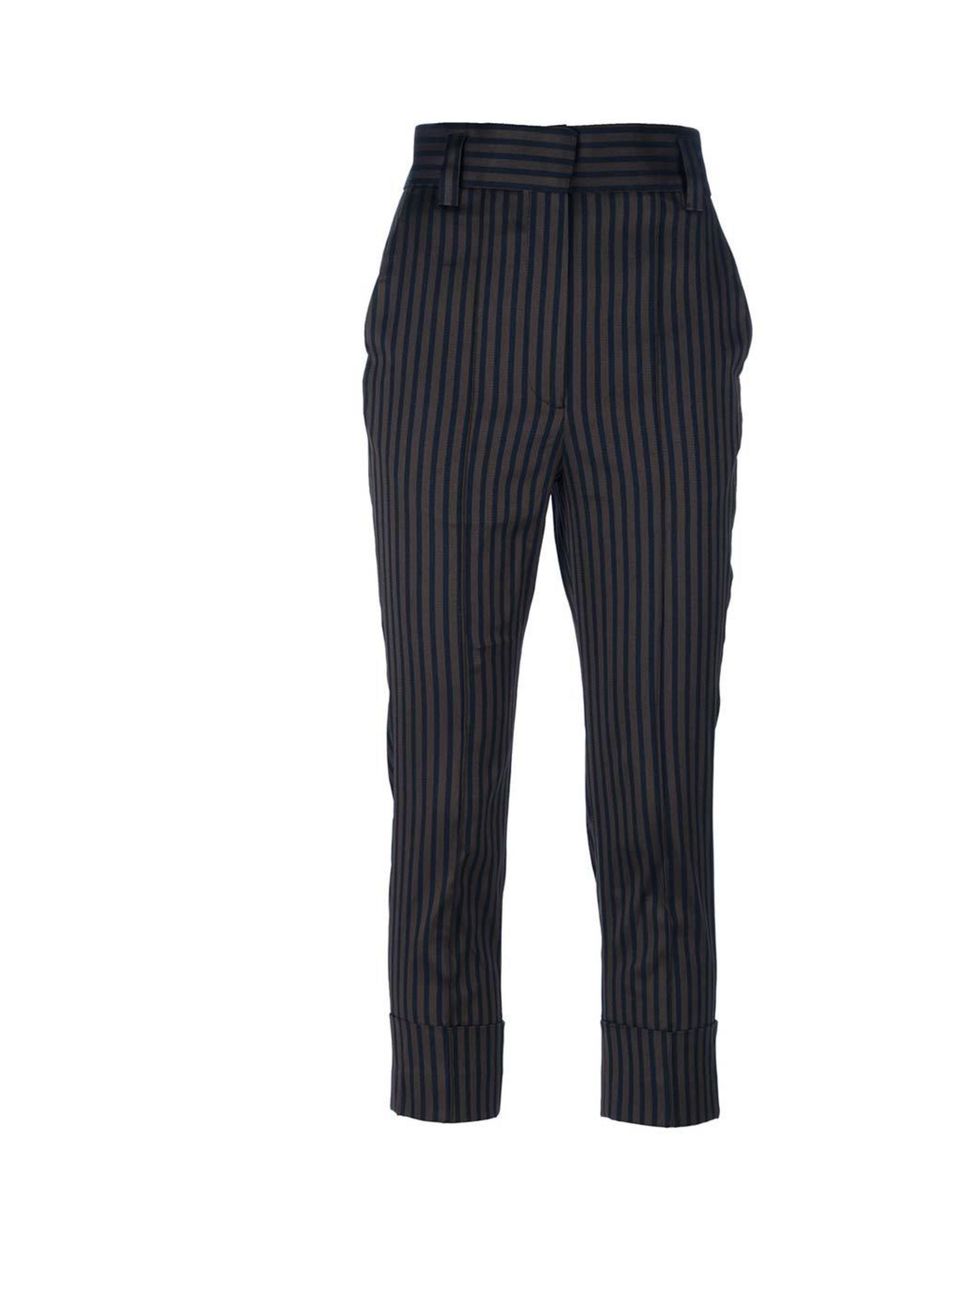 The pinstripe trousers